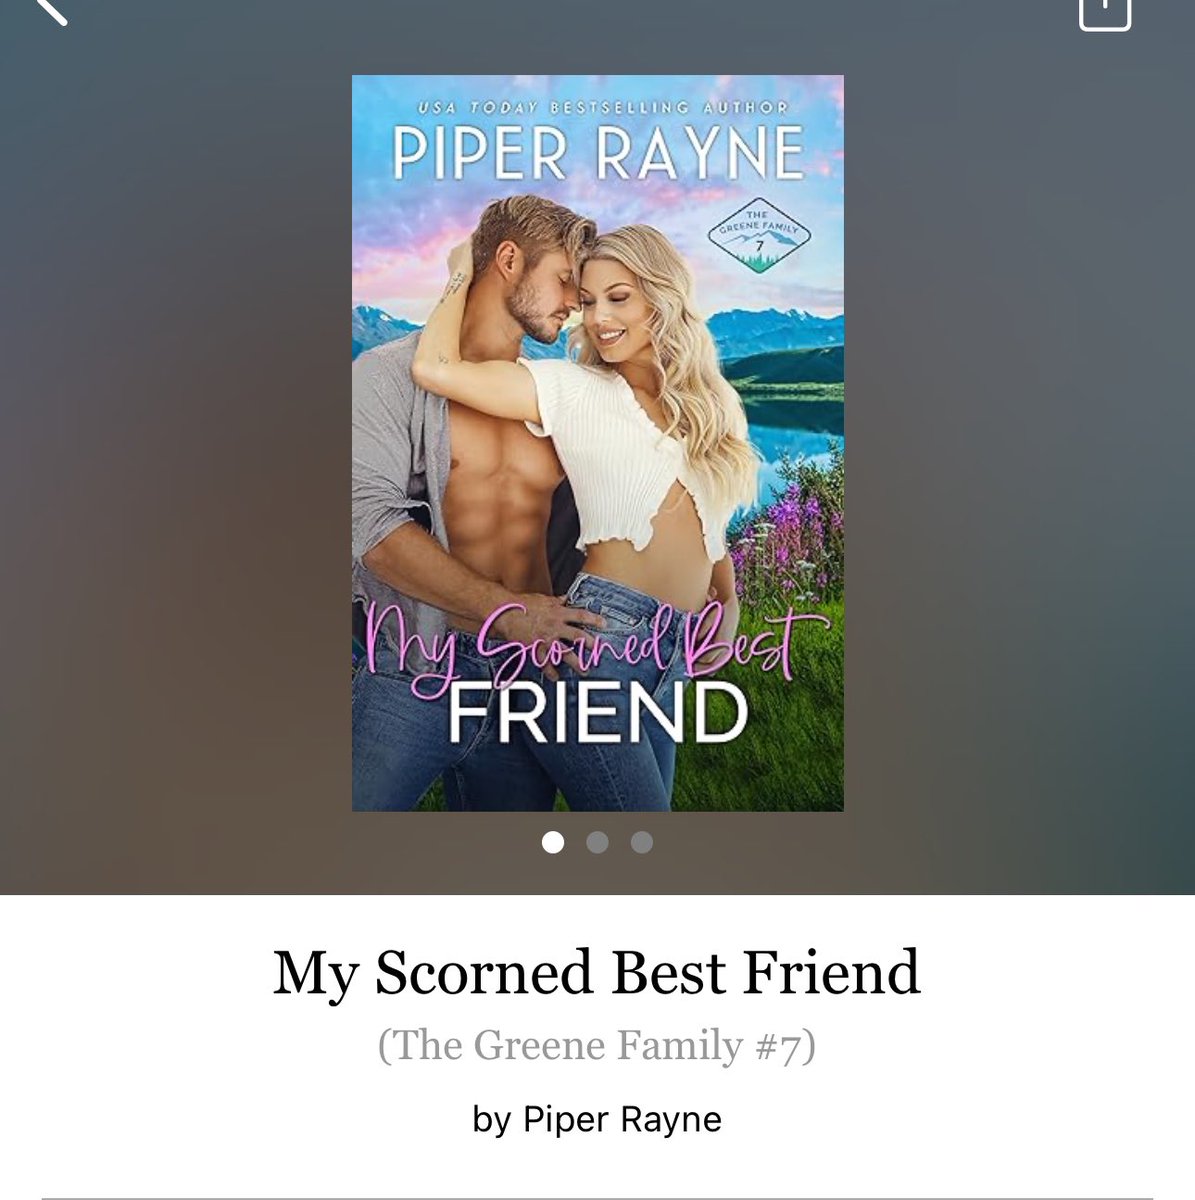 My Scorned Best Friend by Piper Rayne 

#MyScornedBestFriend by #piperRayne #6335 #31chaptes #256pages #485of400 #7houraudiobook #Audiobook #book7of9.5 #XavierAndClara #TheGreeneFamilySeries #May2024 #clearingoffreadingshelves #whatsnext #readitquick